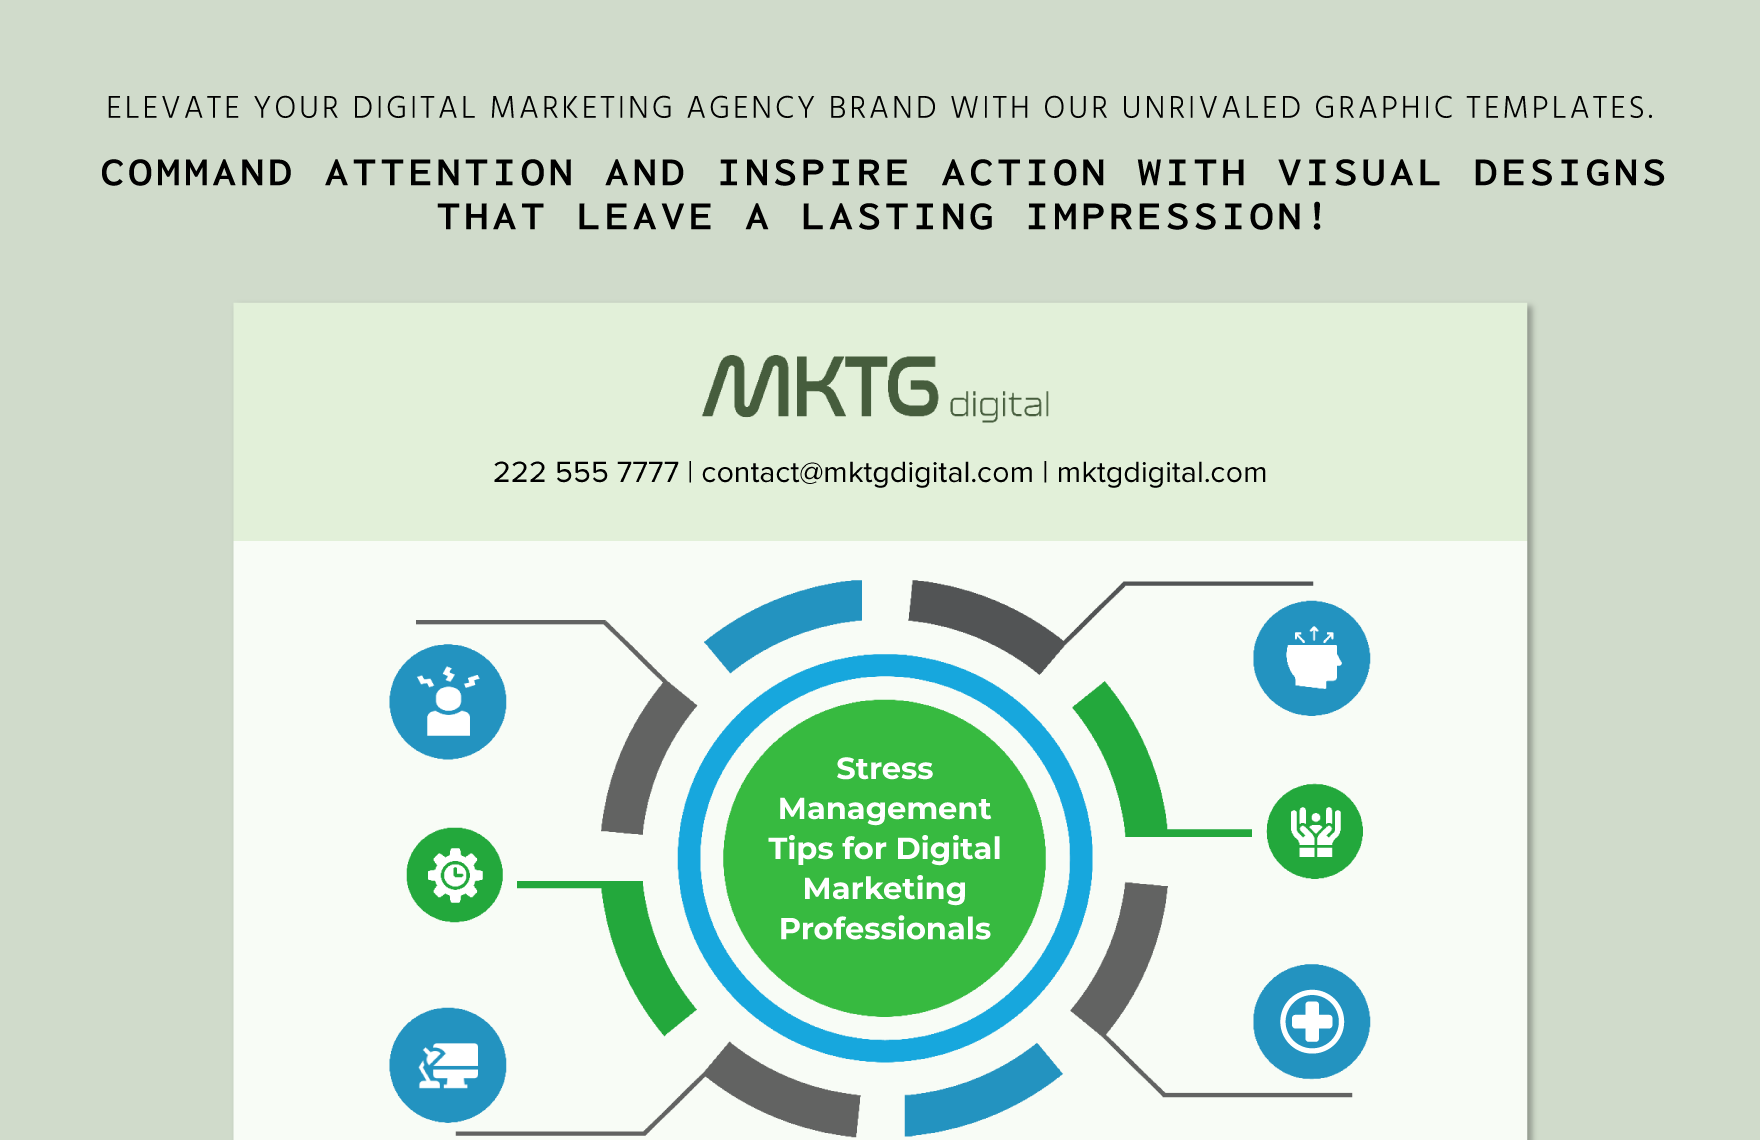 Digital Marketing Agency Employee Stress Management Tips Infographic Template